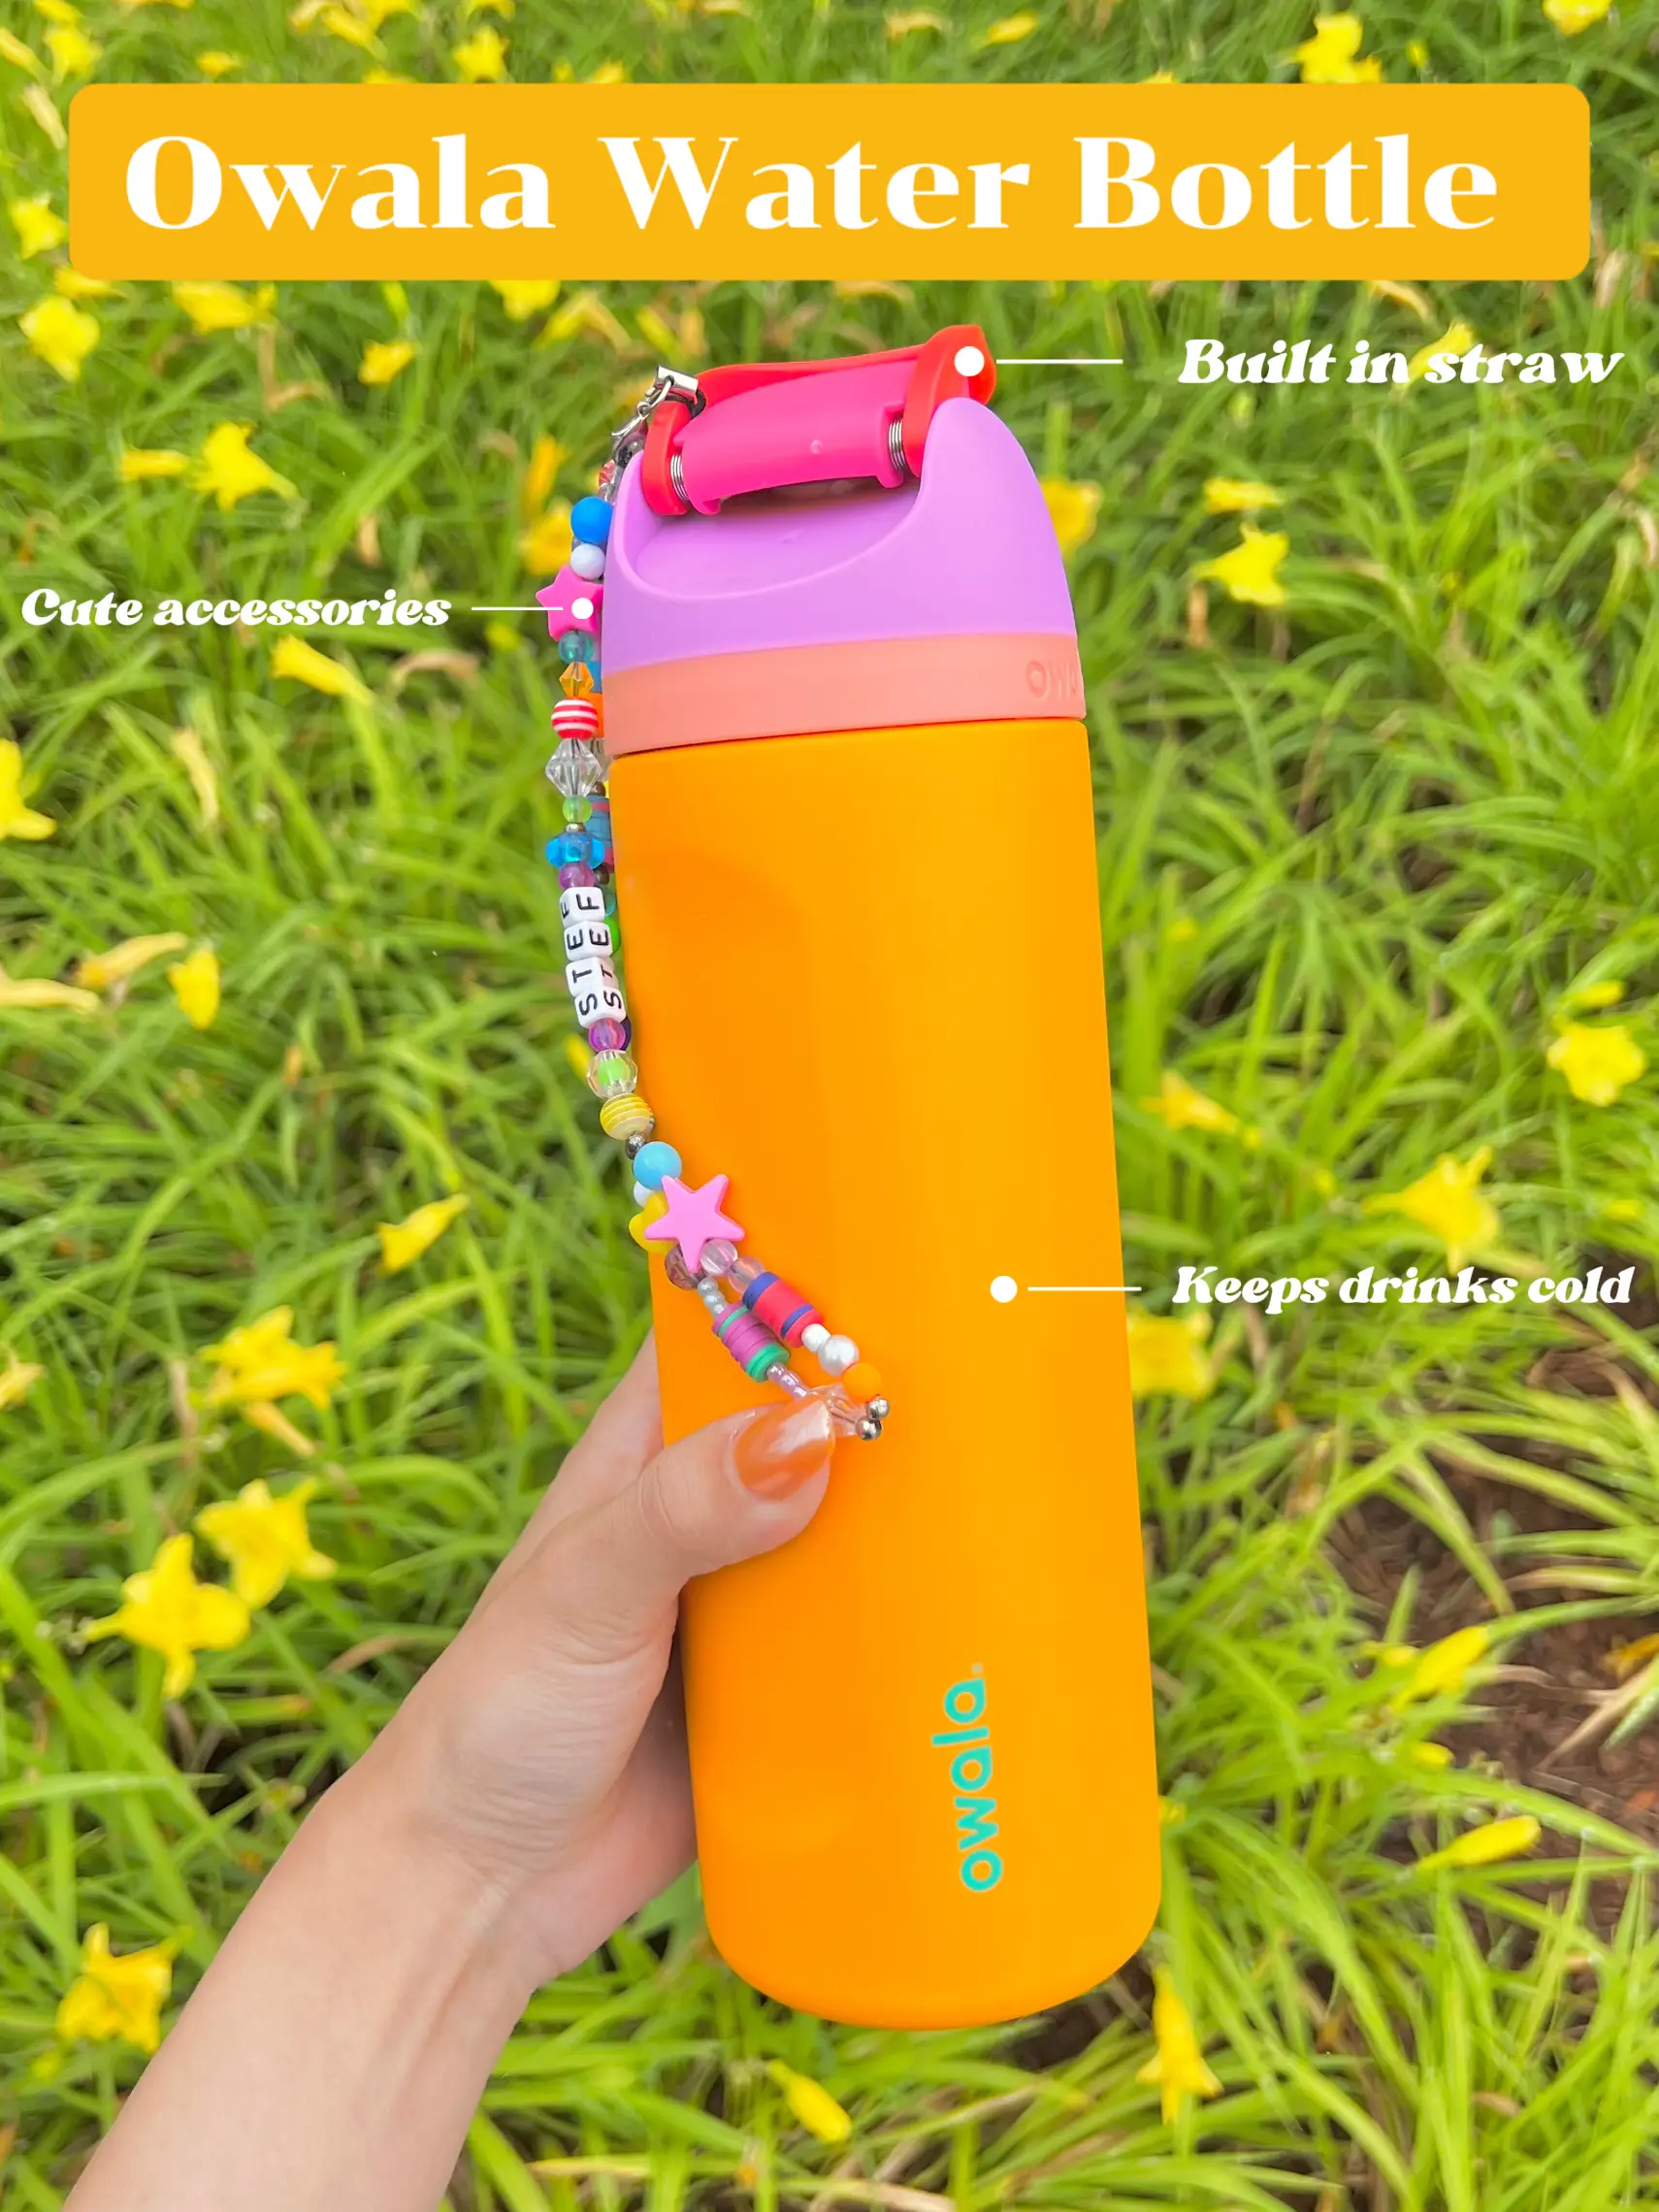 Owala Water Bottle 🍊 ✨, Gallery posted by S ₊✩‧₊˚౨ৎ˚₊✩‧₊